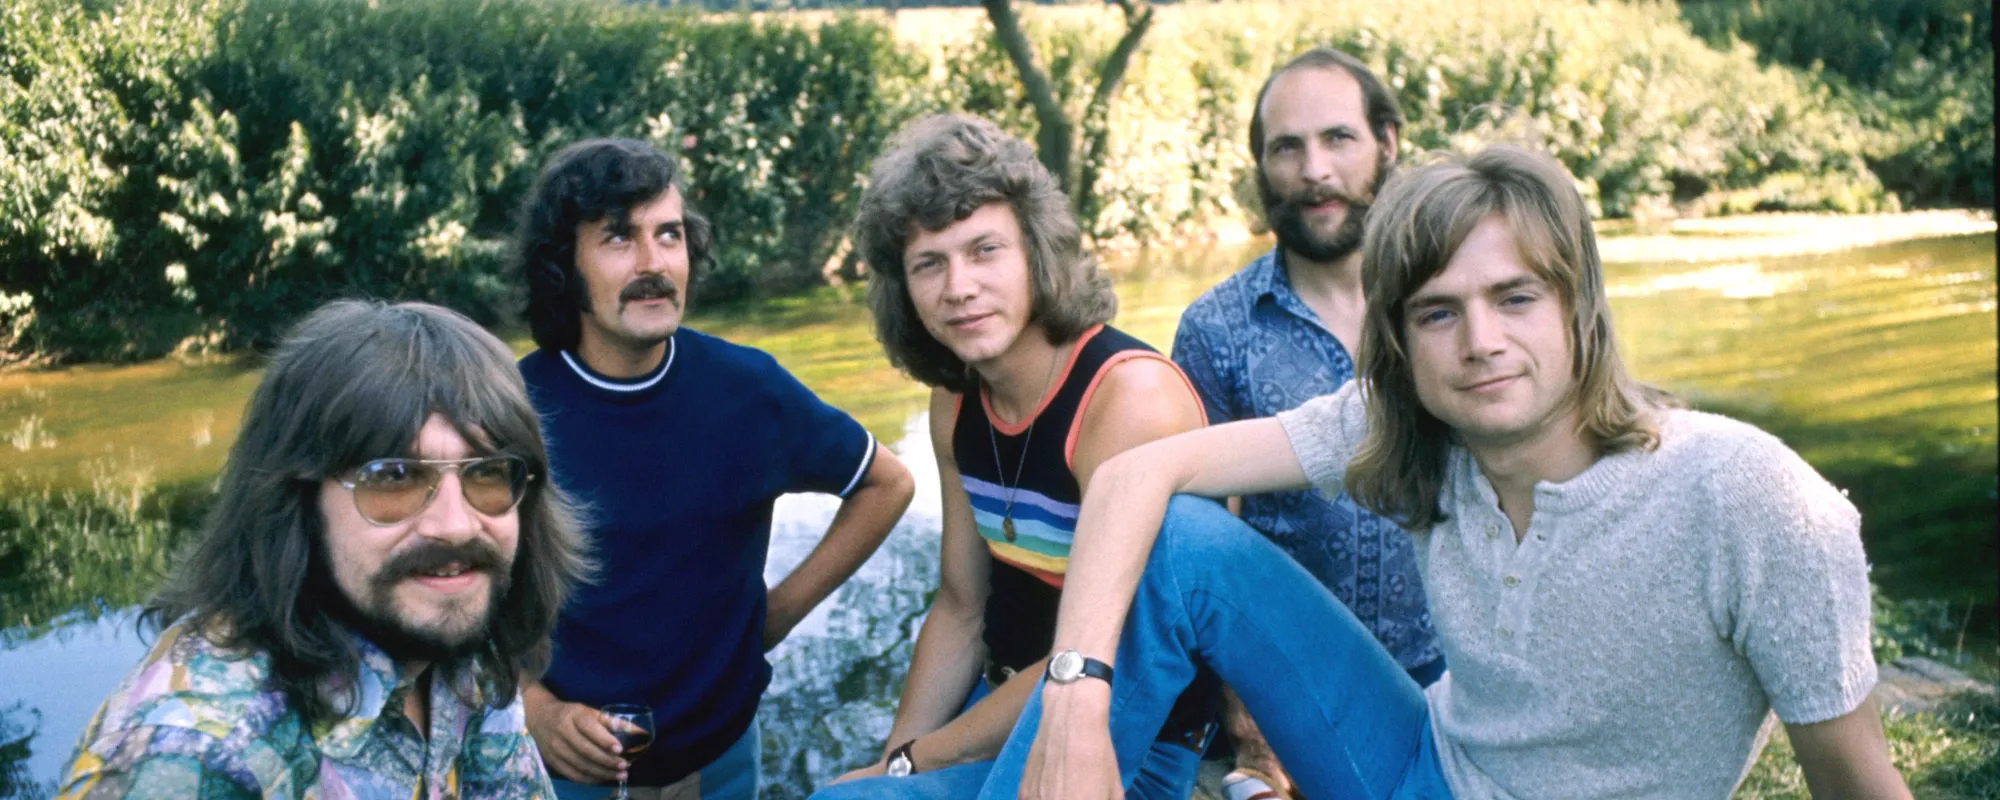 Meaning Behind the Band Name: The Moody Blues